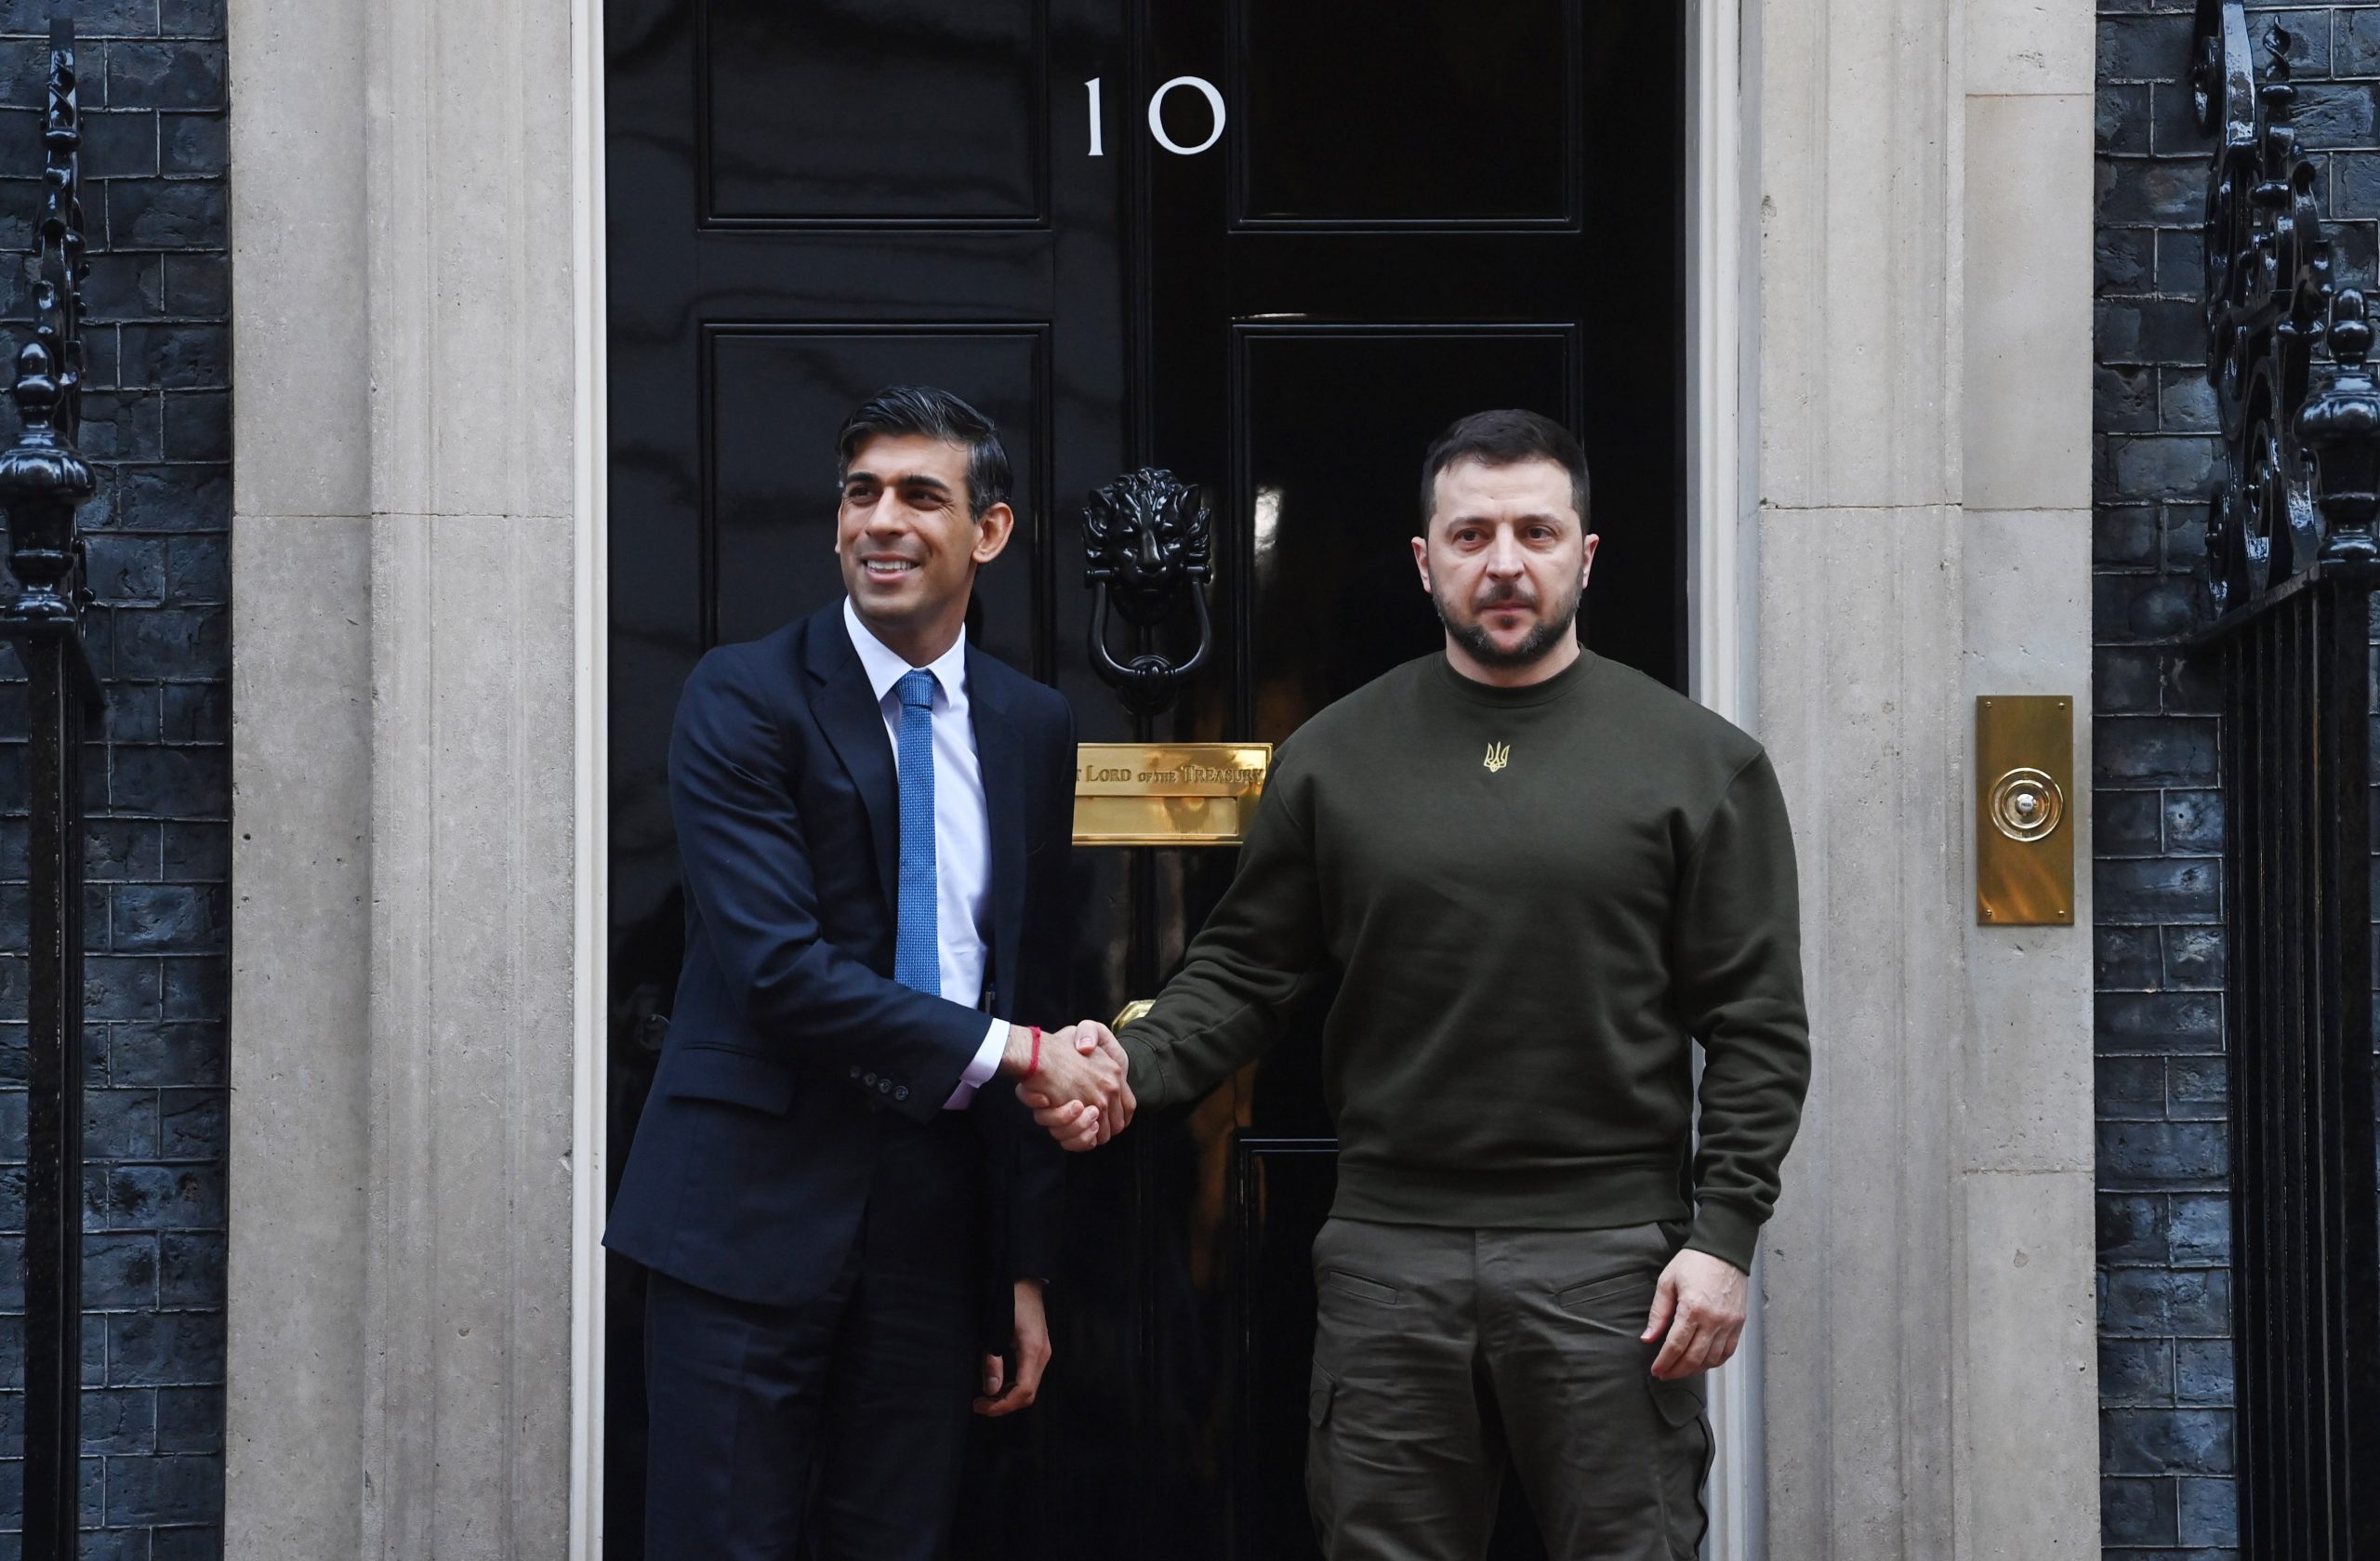 epa10454448 British Prime Minister Rishi Sunak (L) welcomes Ukraine President Volodymyr Zelensky (R) to 10 Downing Street in London, Britain, 08 February 2023. Zelensky is making his first visit to the UK since the start of the Russian invasion of Ukraine.  EPA/NEIL HALL